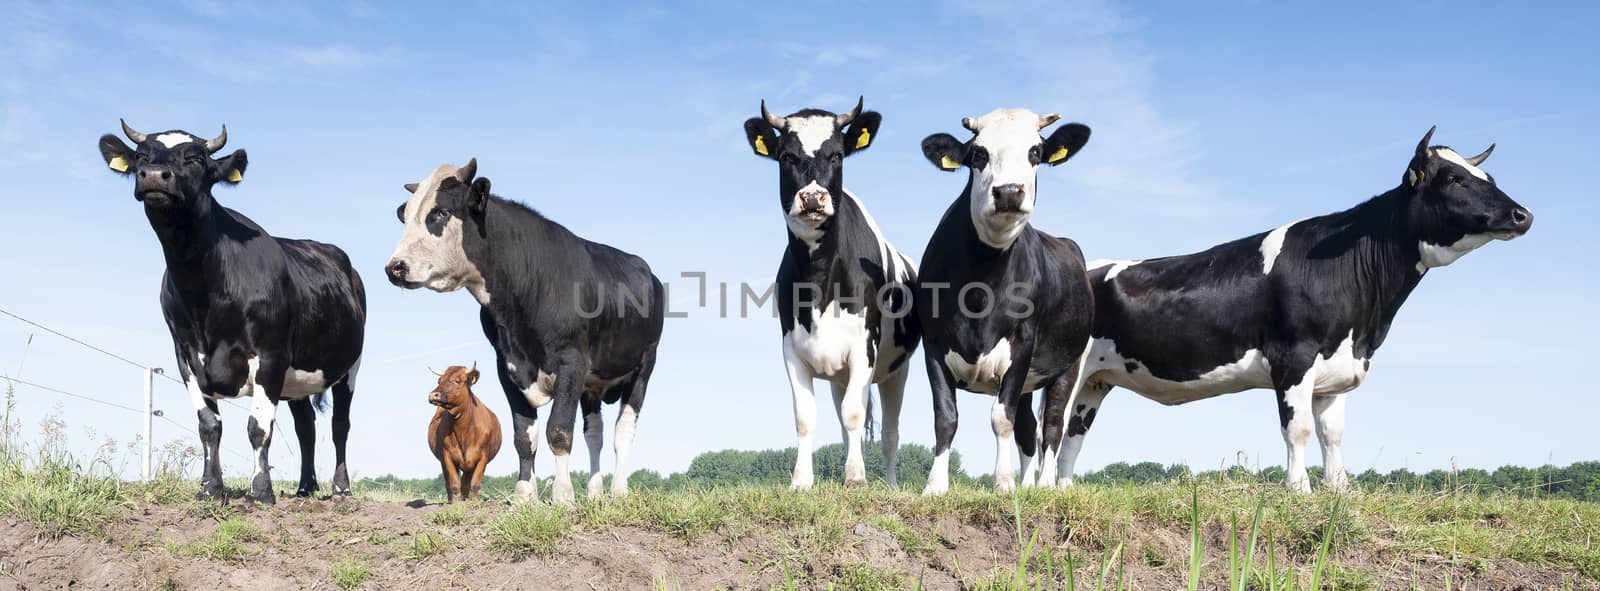 young horned black and white spotted cows under blue sky in meadow reflected in water of ditch under blue sky